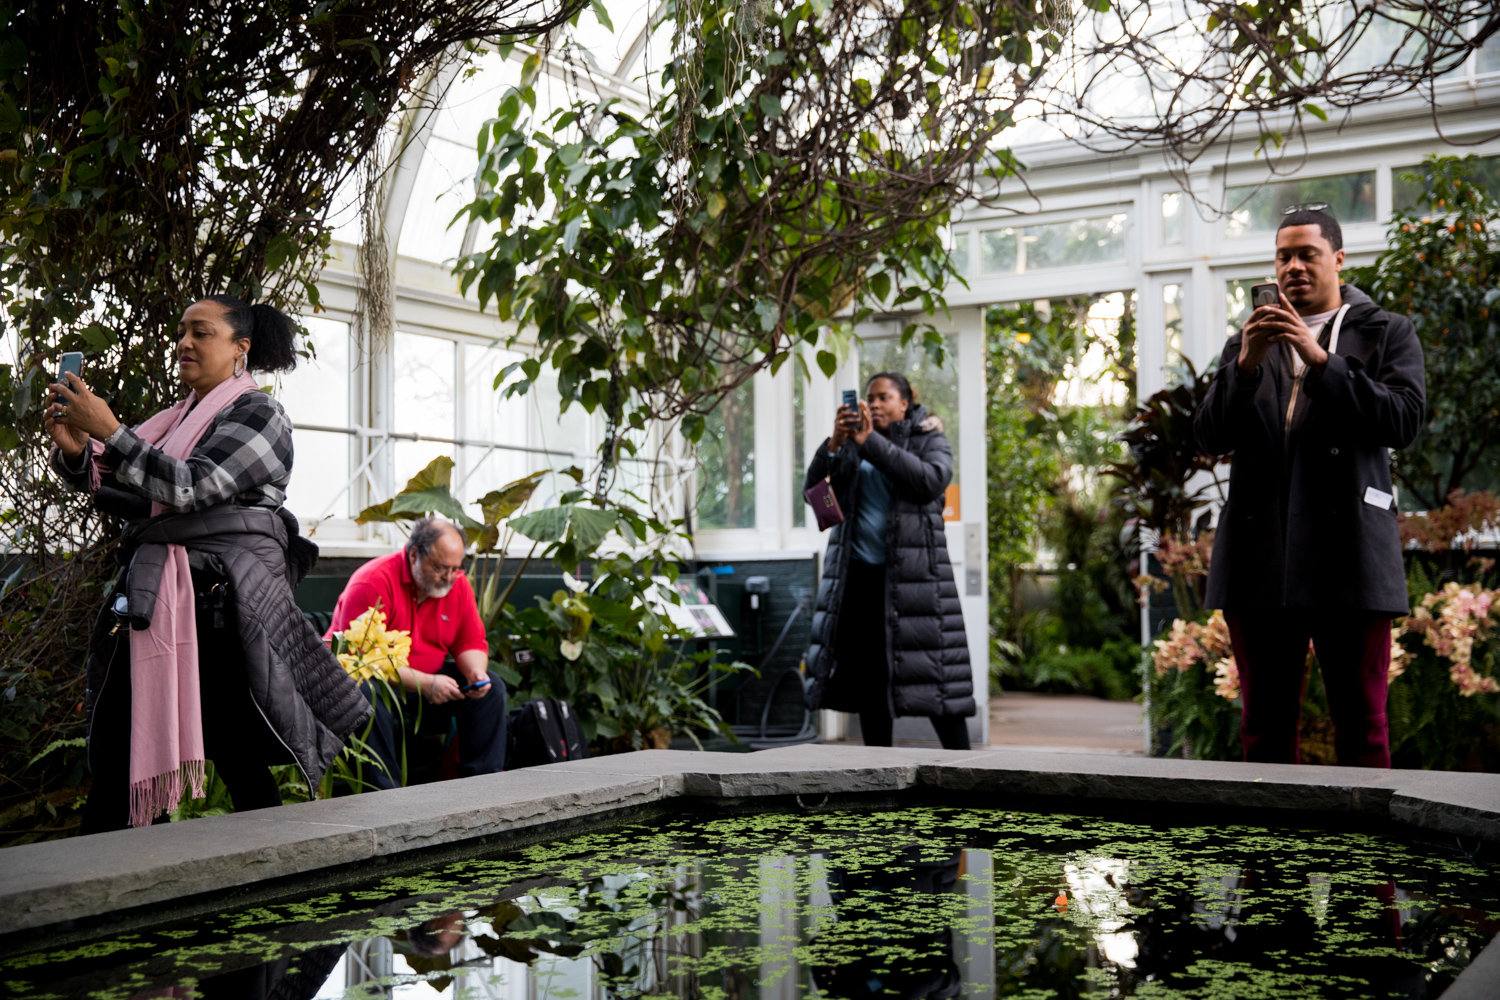 Visitors at the New York Botanical Garden take photos of orchid displays in the Enid A. Haupt Conservatory.